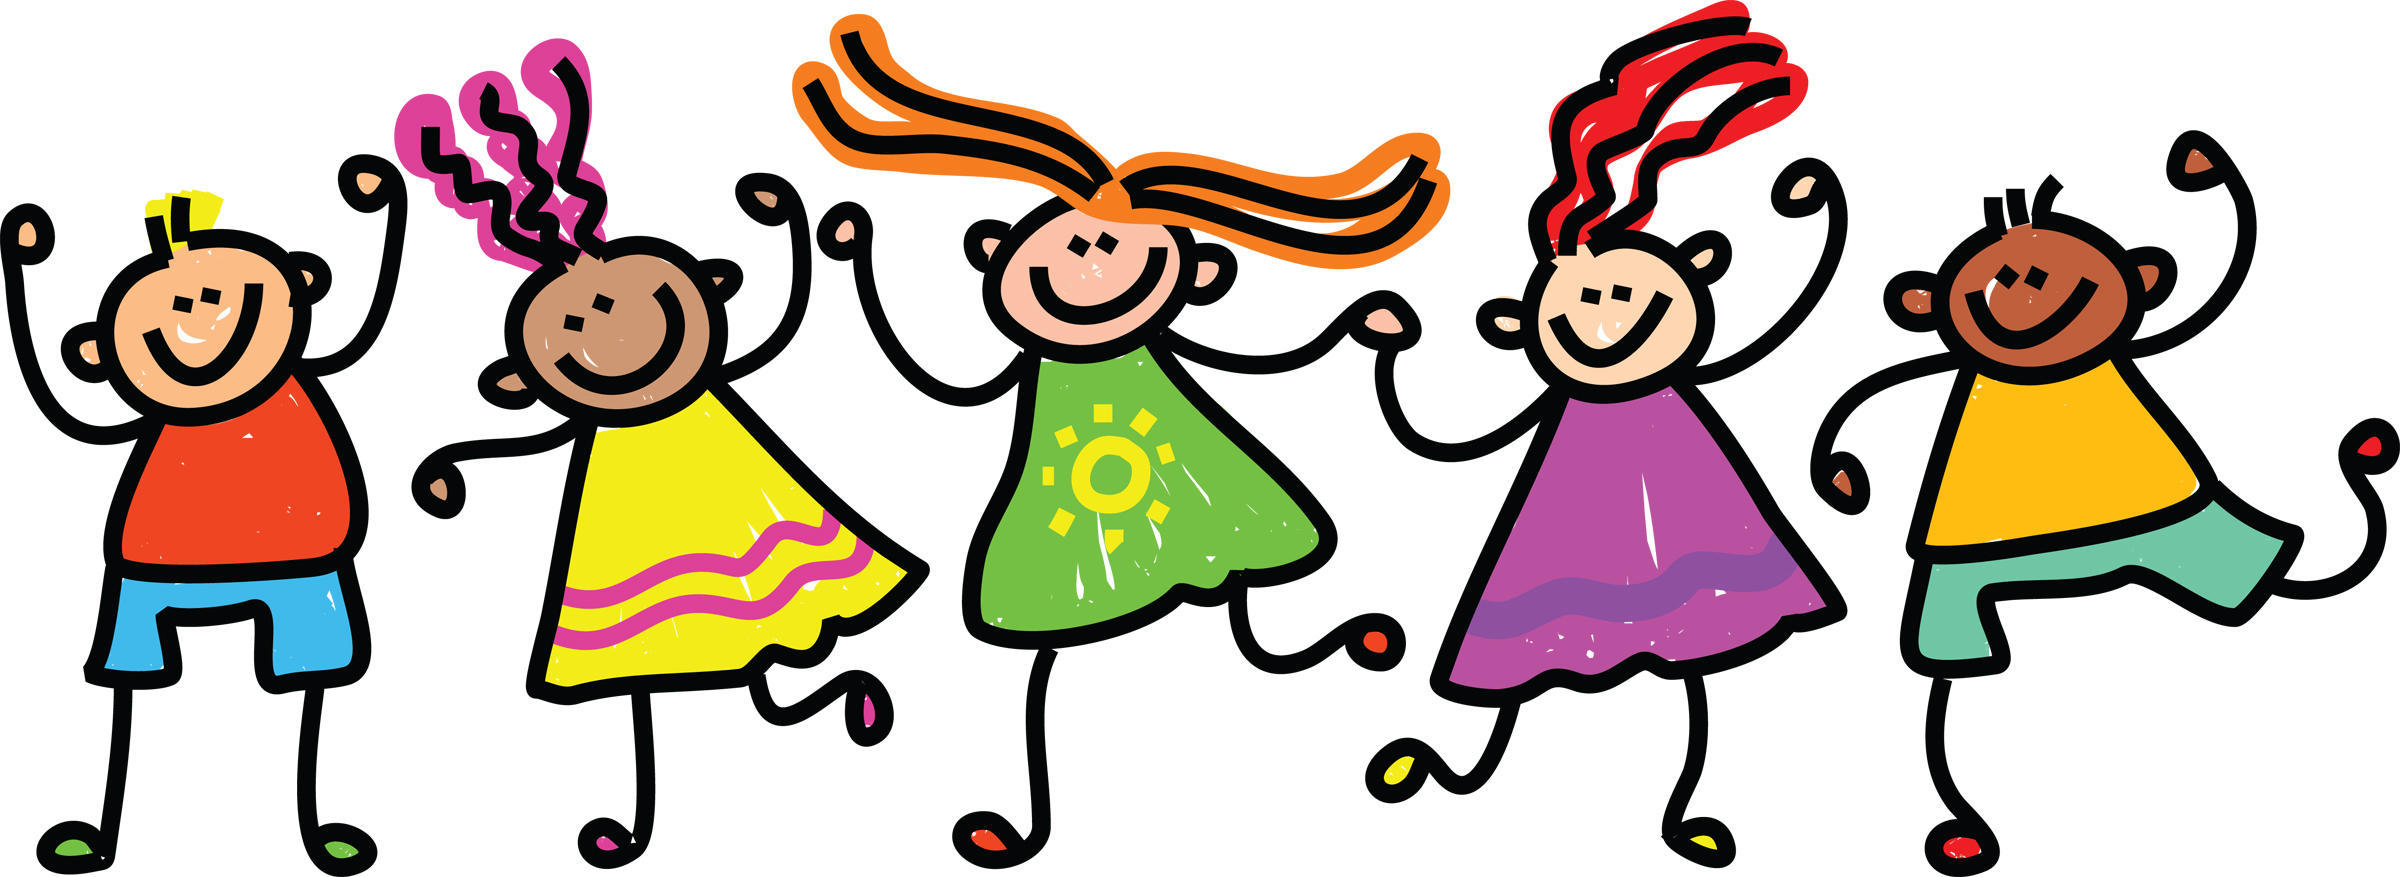 Happy Students Clipart